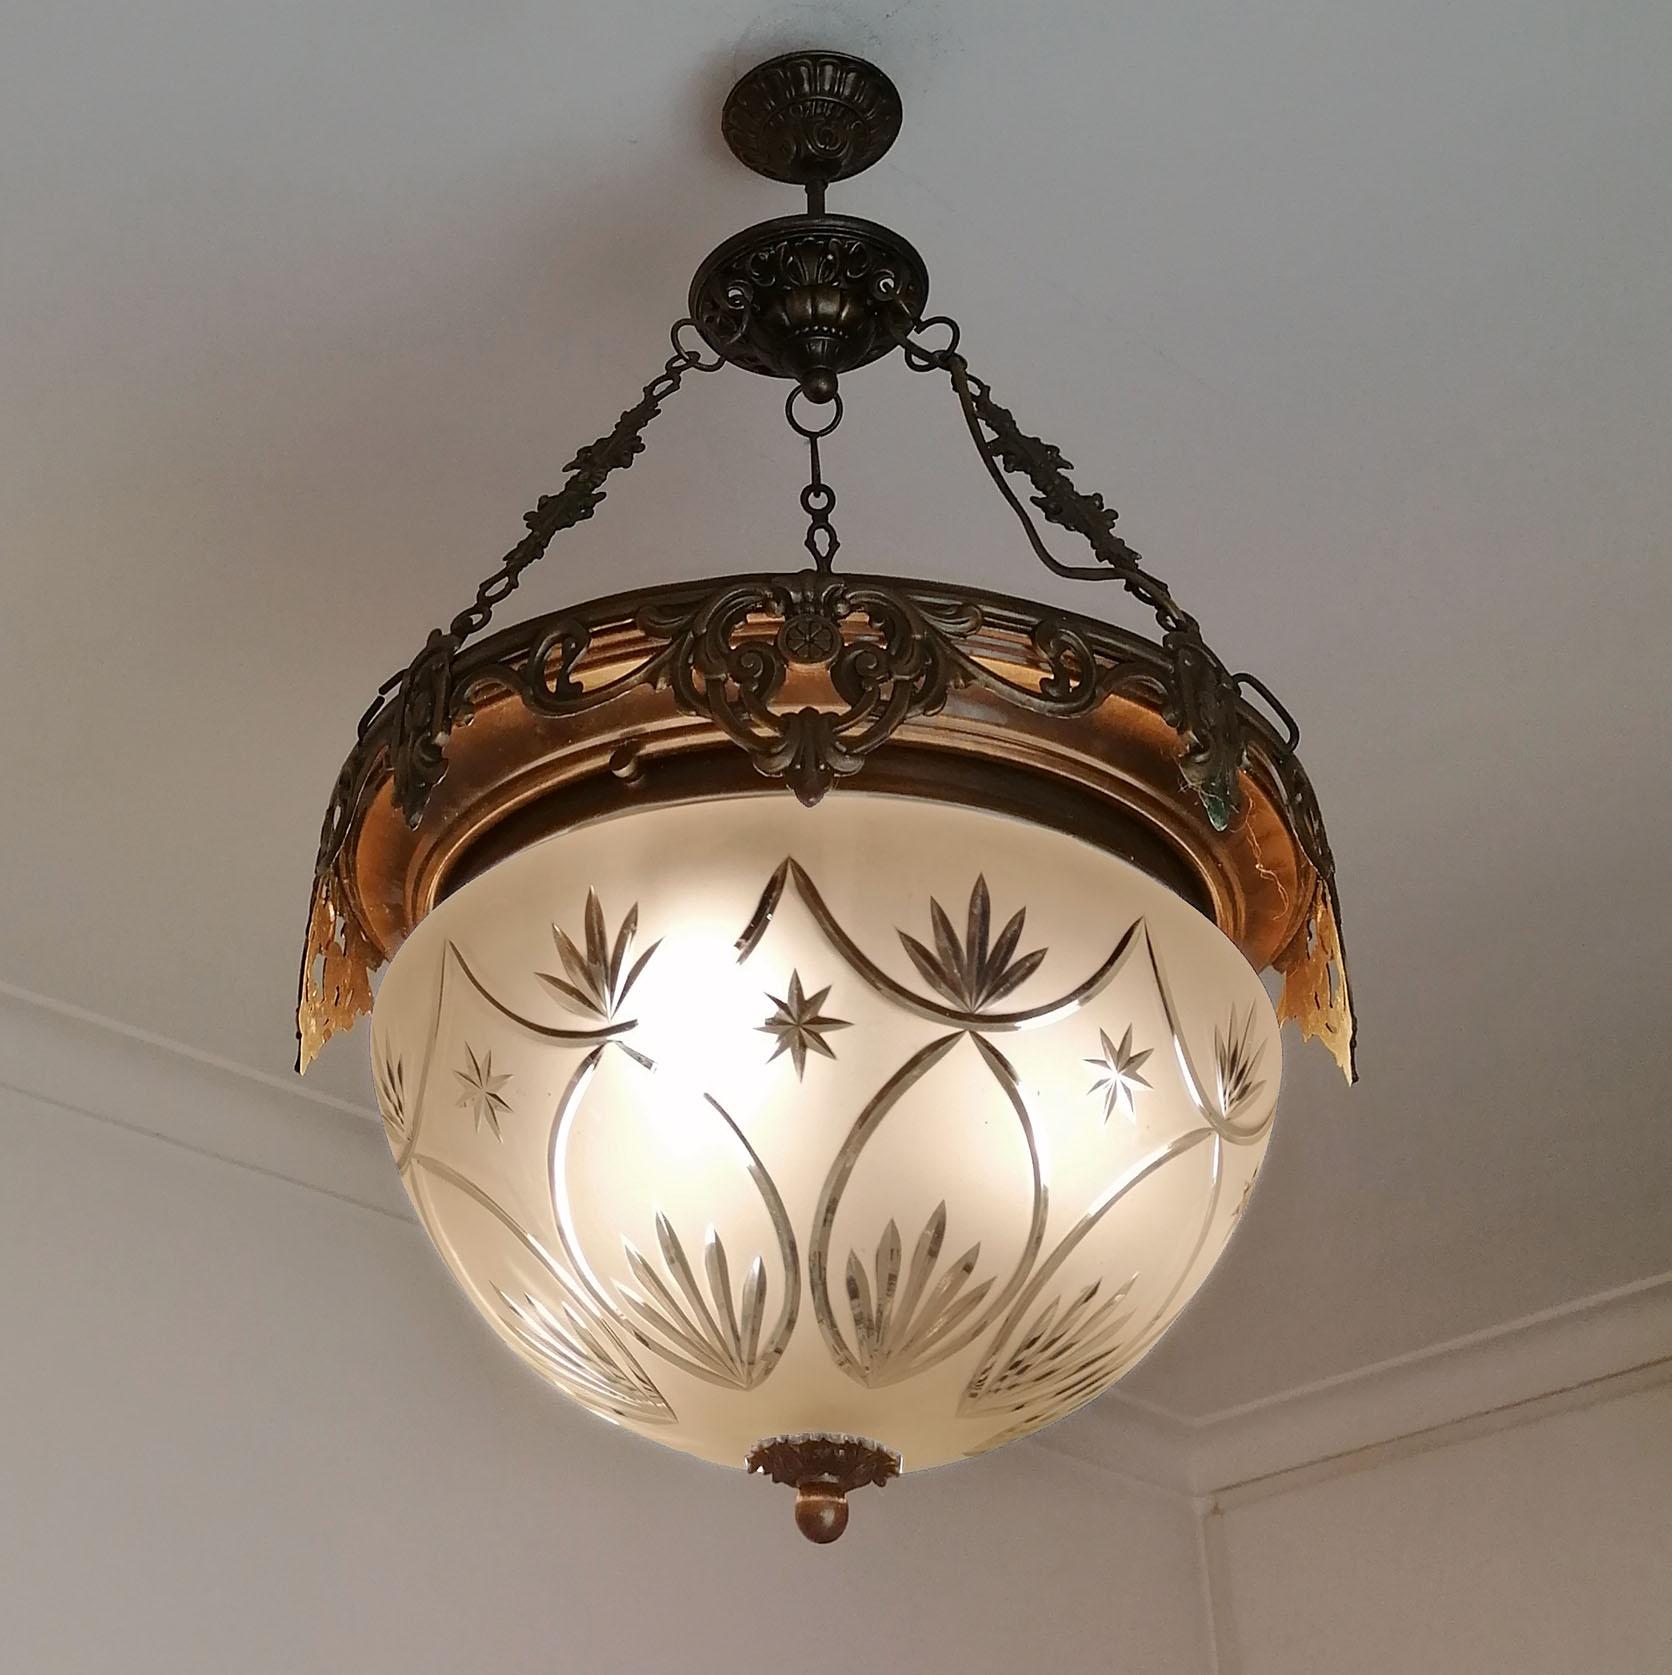 Large French Art Nouveau Art Deco Ornate Burnished Brass & Cut Glass Chandelier In Good Condition For Sale In Coimbra, PT